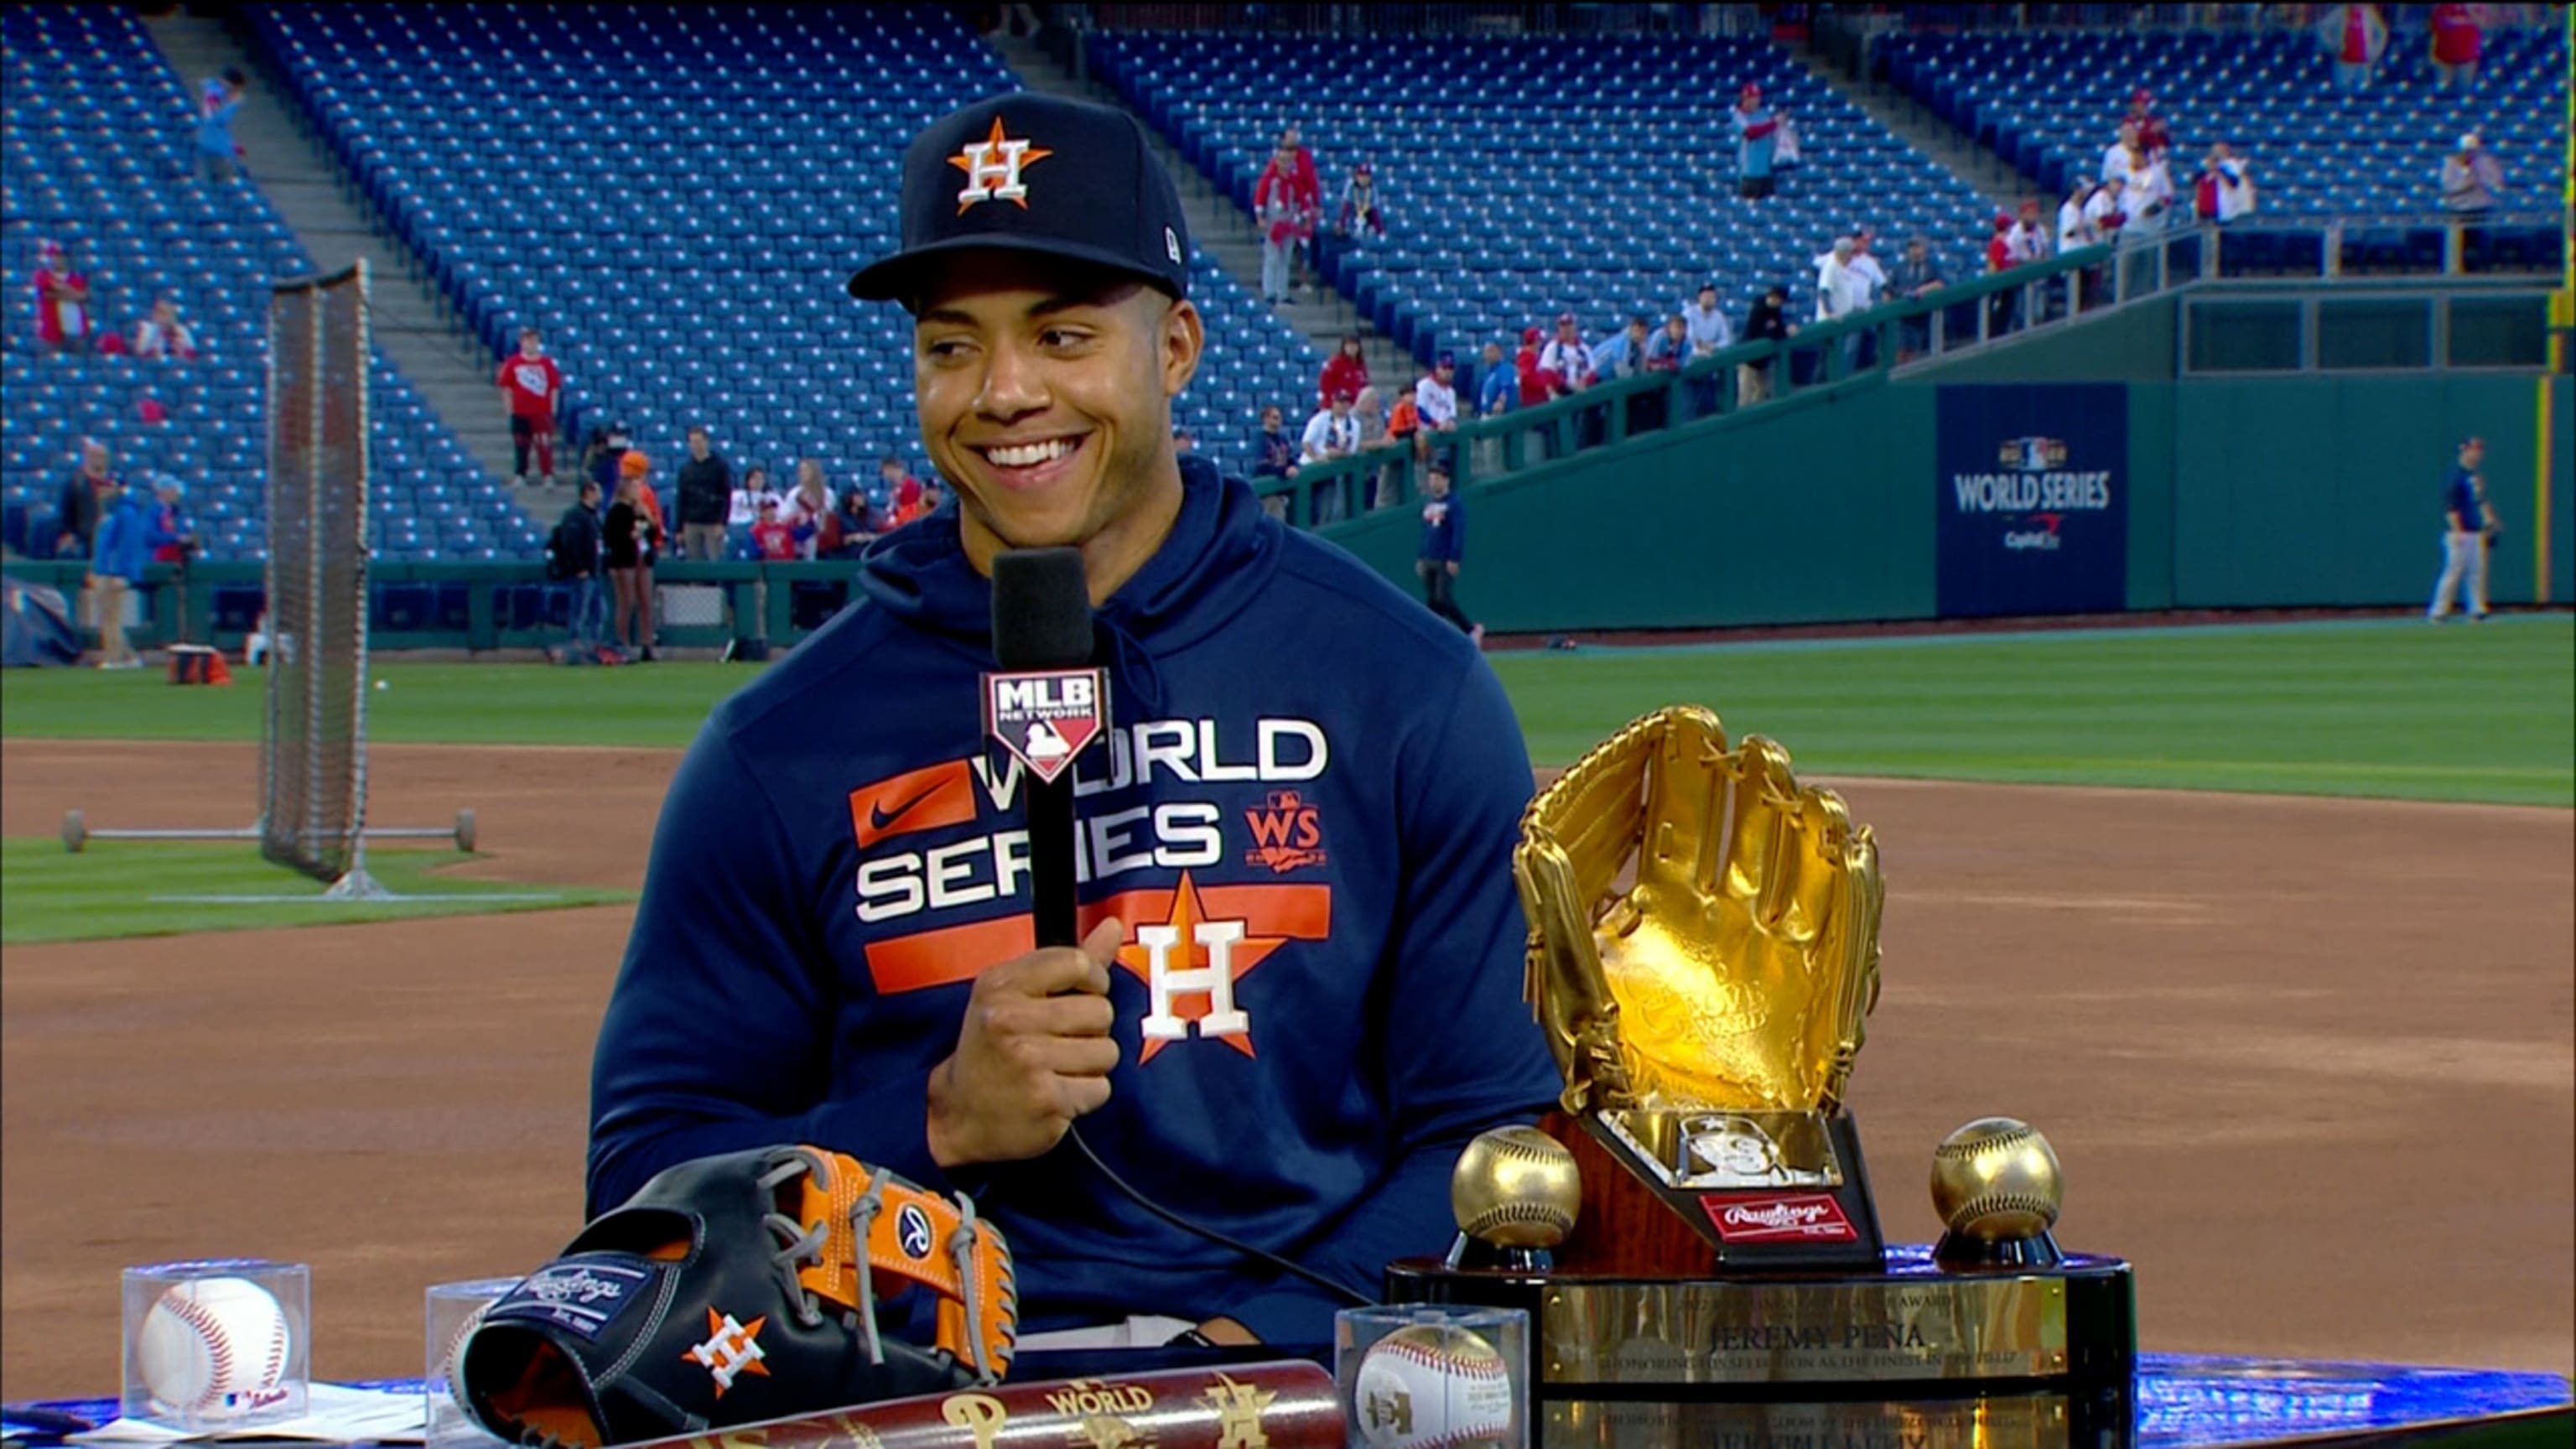 Jeremy Peña, of Providence, is first rookie SS to win MLB Gold Glove